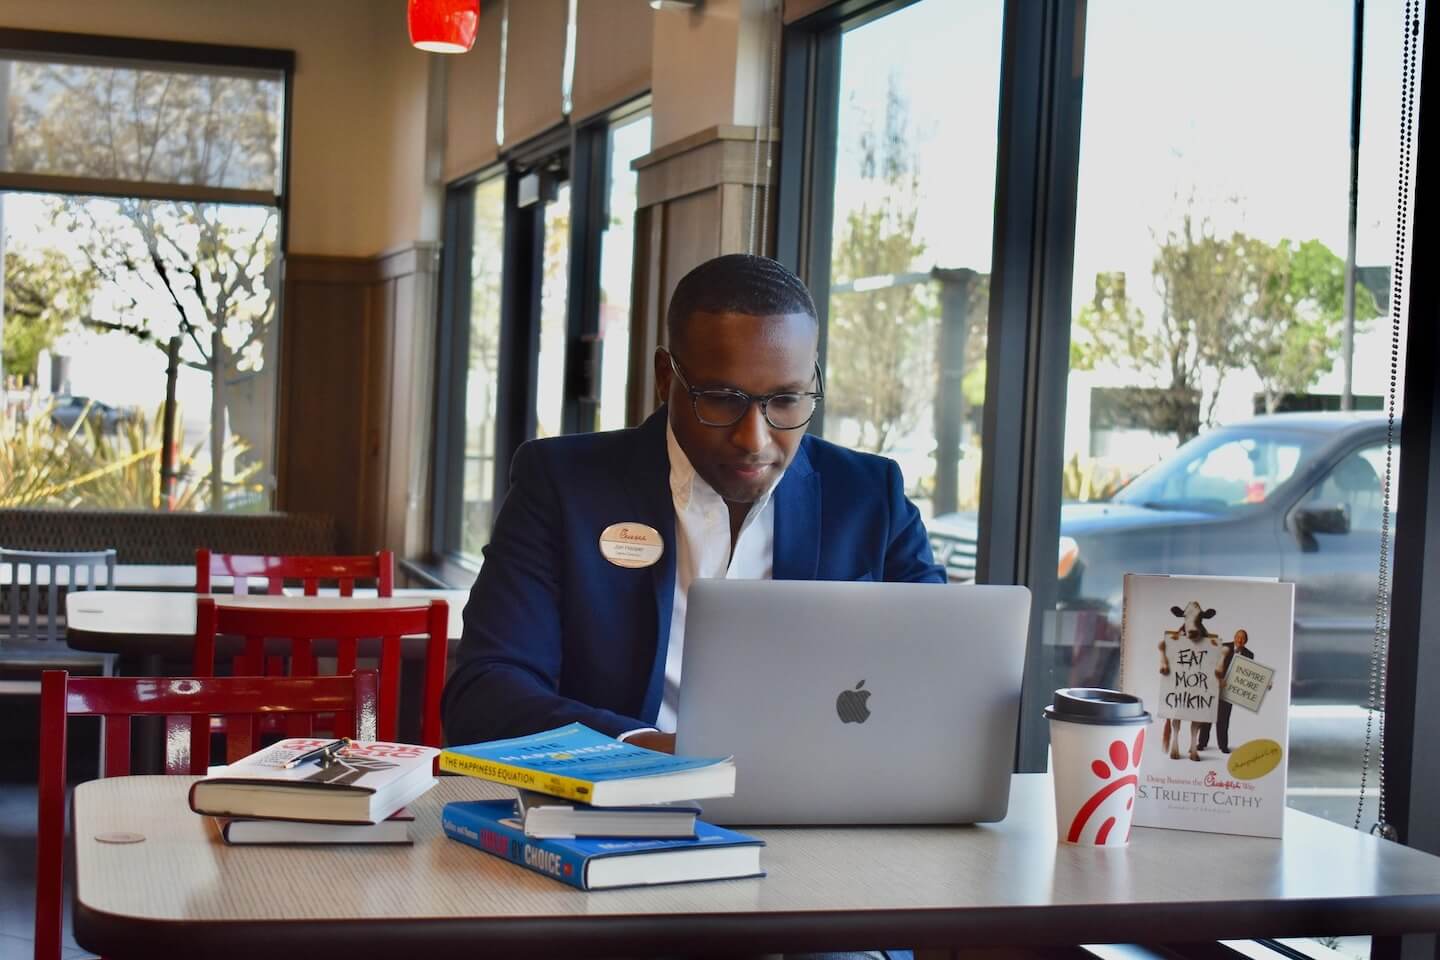 Owner/operator of Chick-fil-A Emeryville, Jon Hooper, types on his computer at a Chick-fil-A table in the restaurant